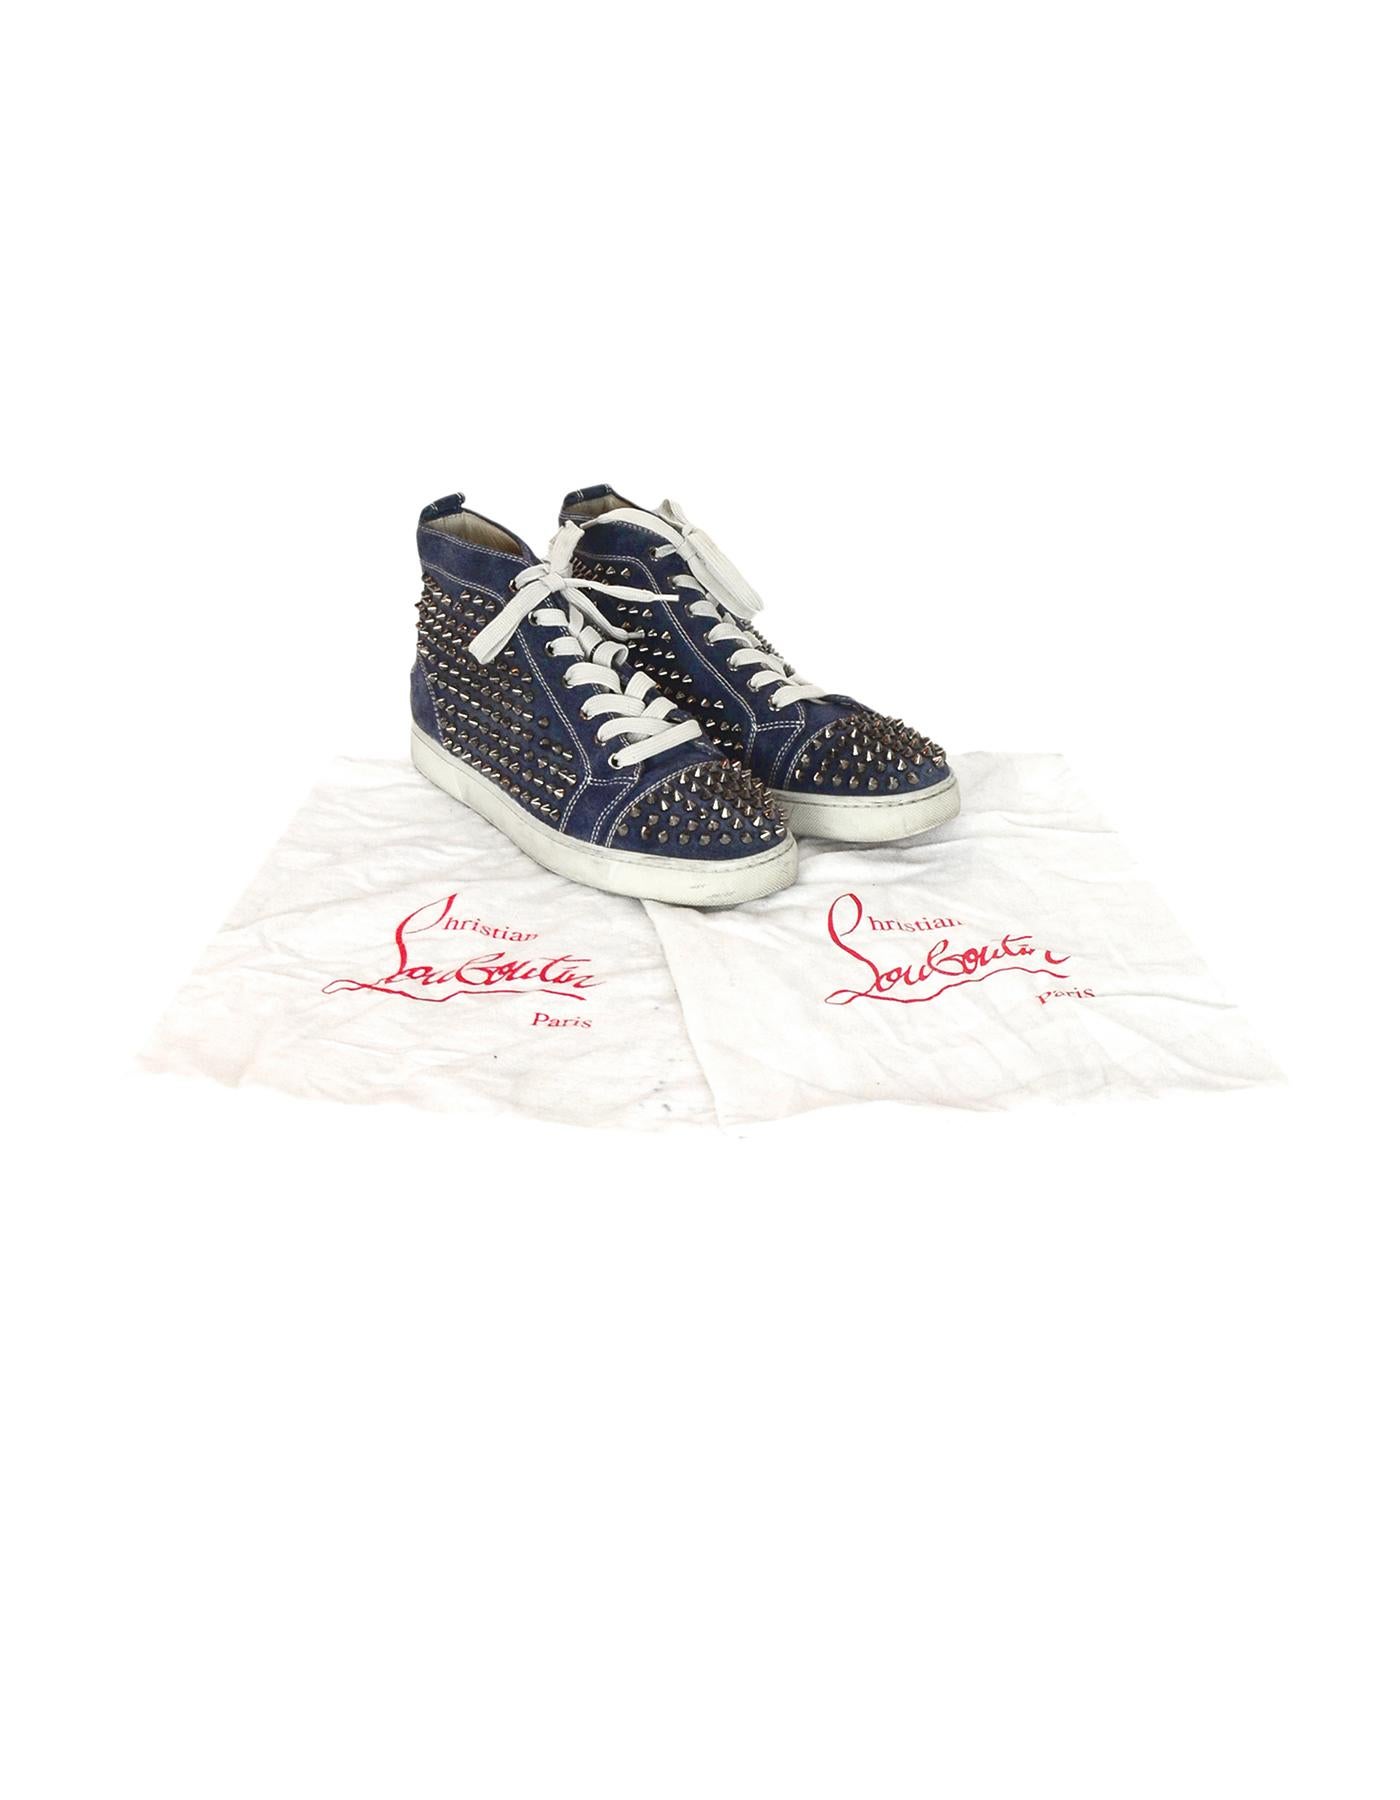 Christian Louboutin Navy Suede Louis Spiked Hi Top Sneakers Sz 40.5 W/ 2 DB

Made In: Italy
Color: Navy, off white, gunmetal 
Hardware: Gunmetal 
Materials: Suede, metal
Closure/Opening: Lace up front 
Overall Condition: Good pre-owned condition